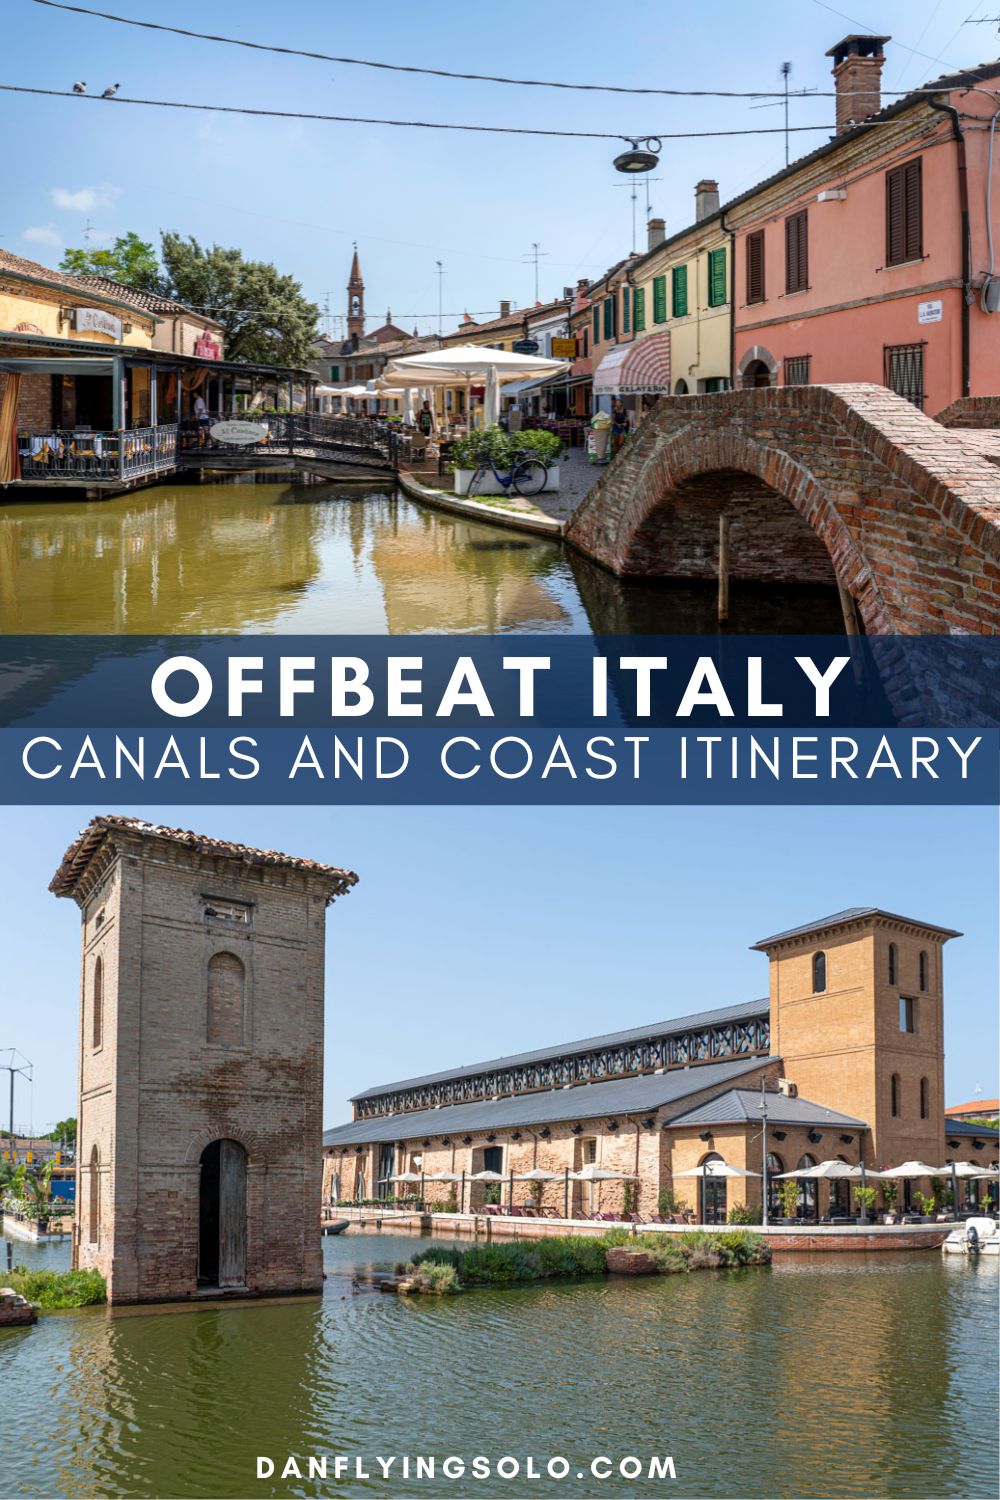 Go offbeat in Italy! Emilia Romagna's Riviera One Week coast and culture itinerary - Plan a one week escape along Emilia Romagna's Coast, including Comacchio, Ravenna and Cervia plus the best beaches near Bolgona.